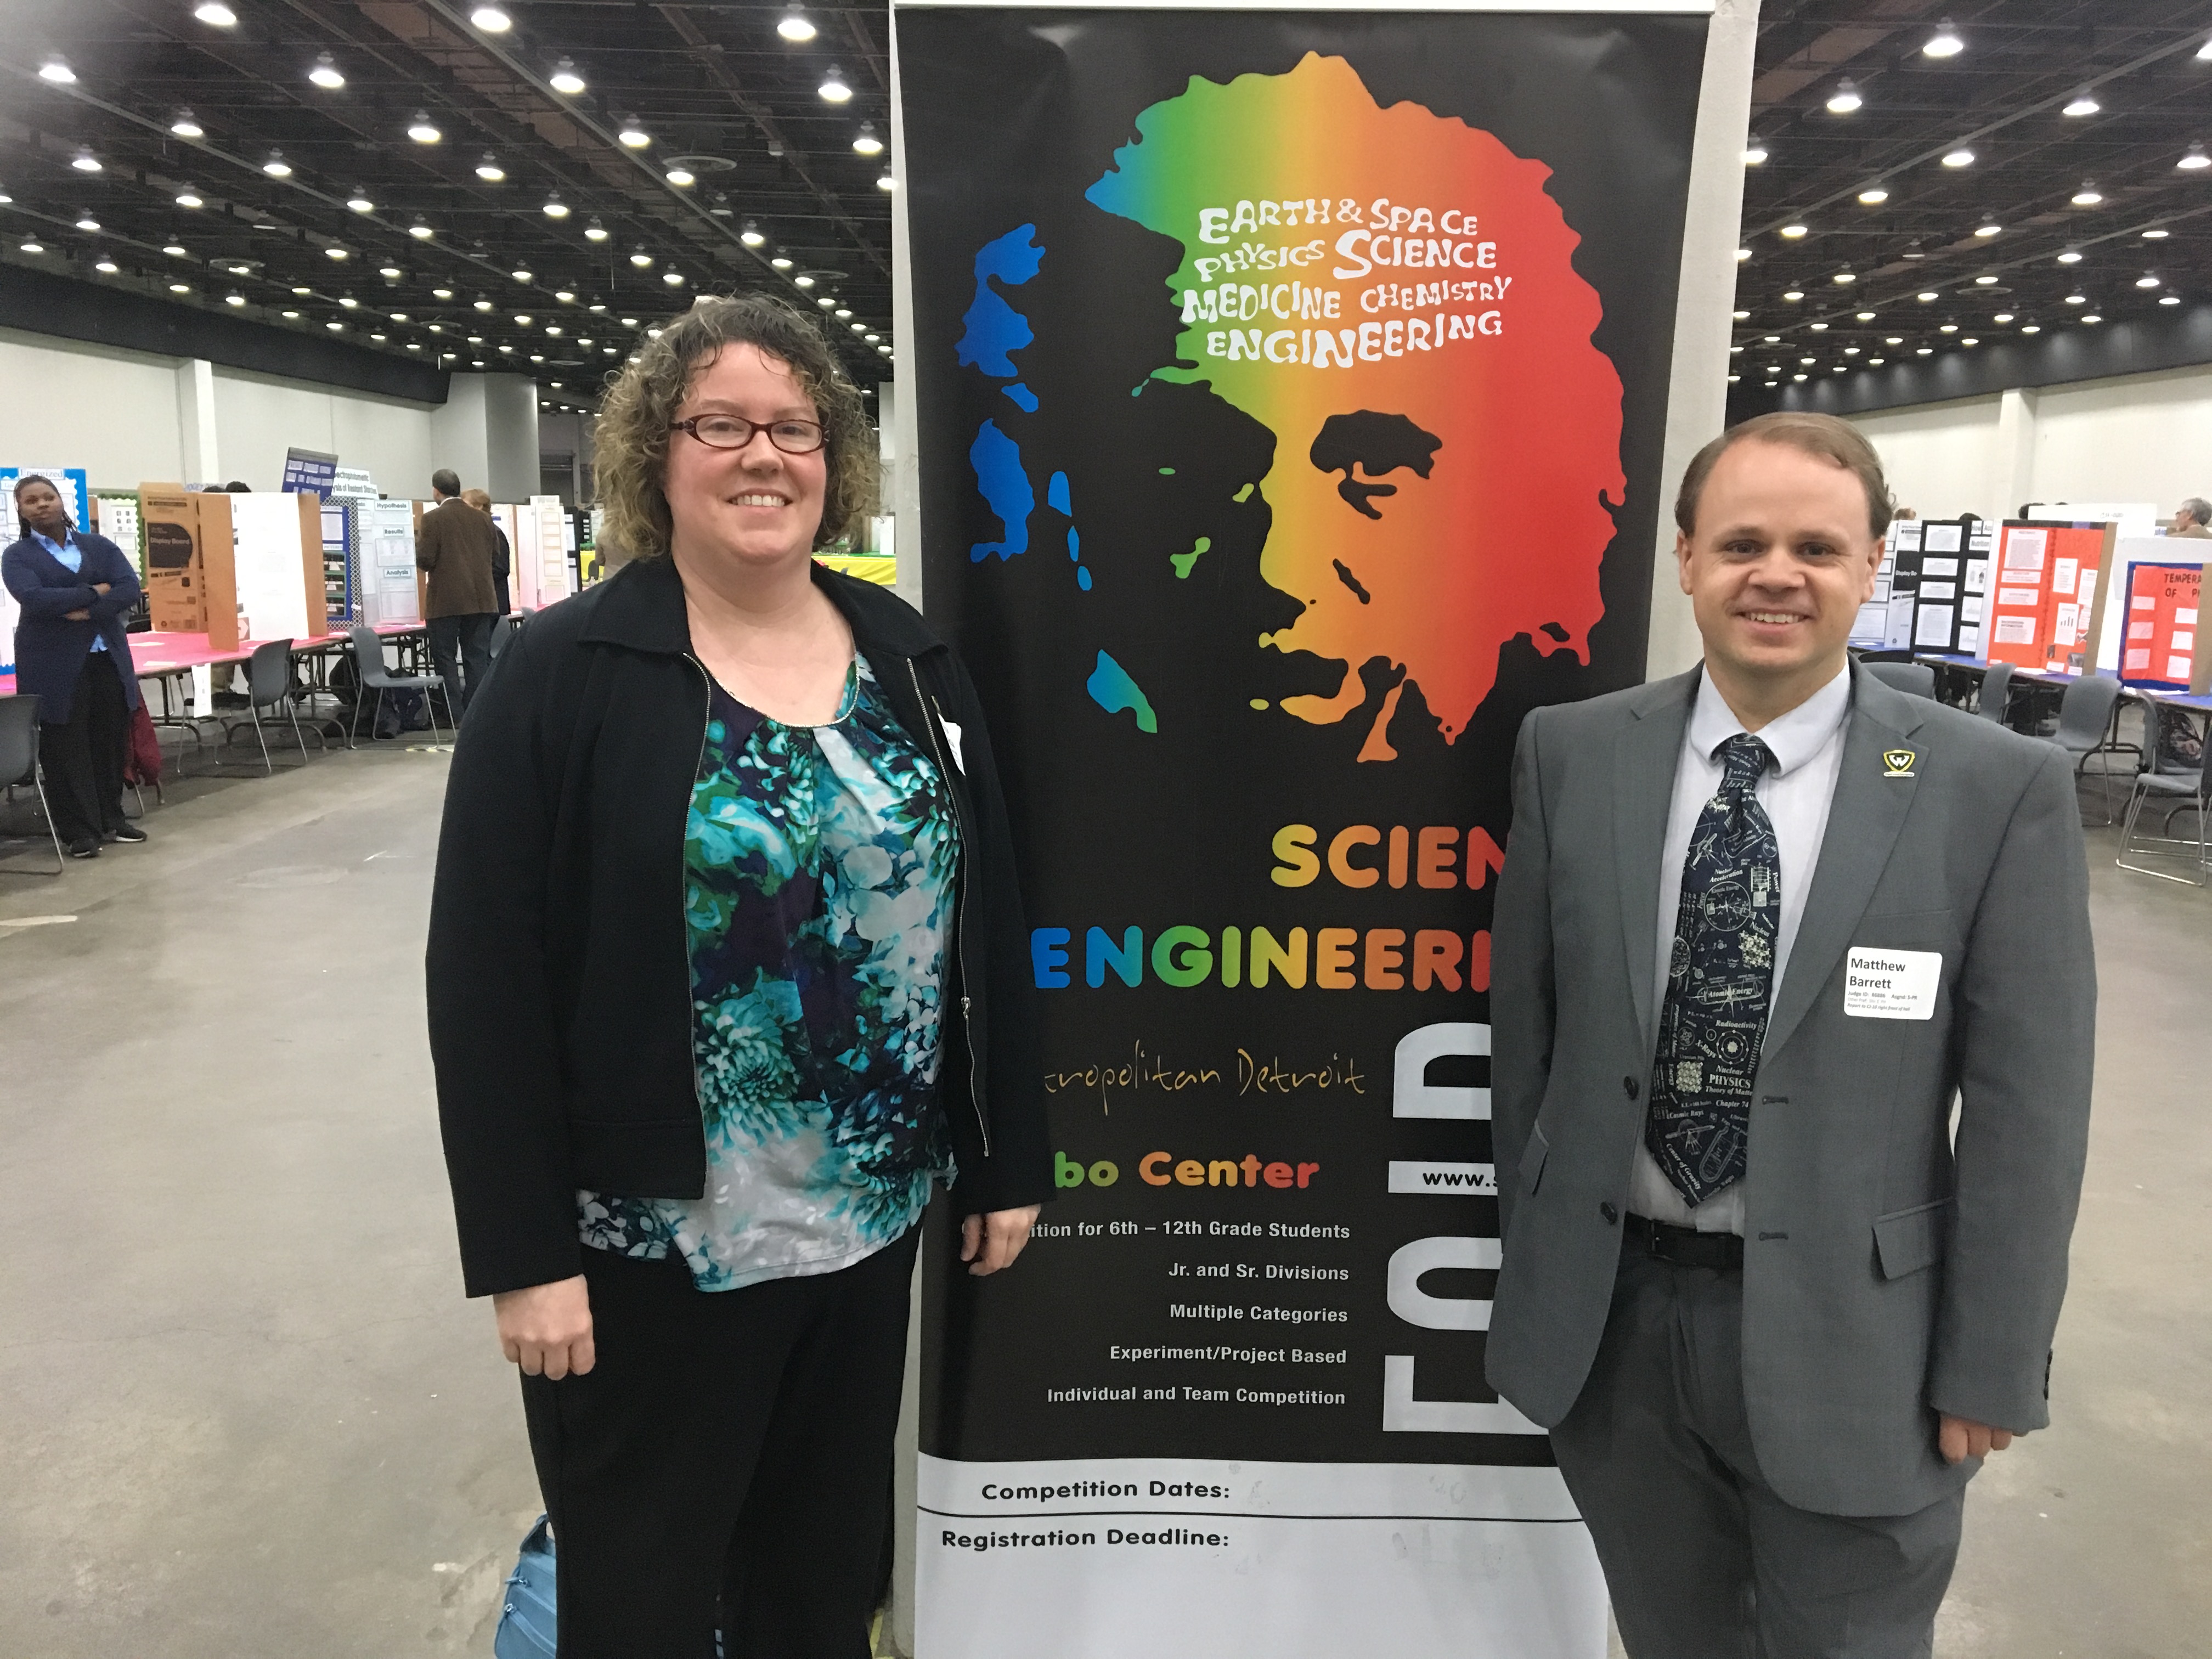 Megan McCullen and Matthew Barrett stand with the banner for the Science Fair, a rainbow colored image of Albert Einstein